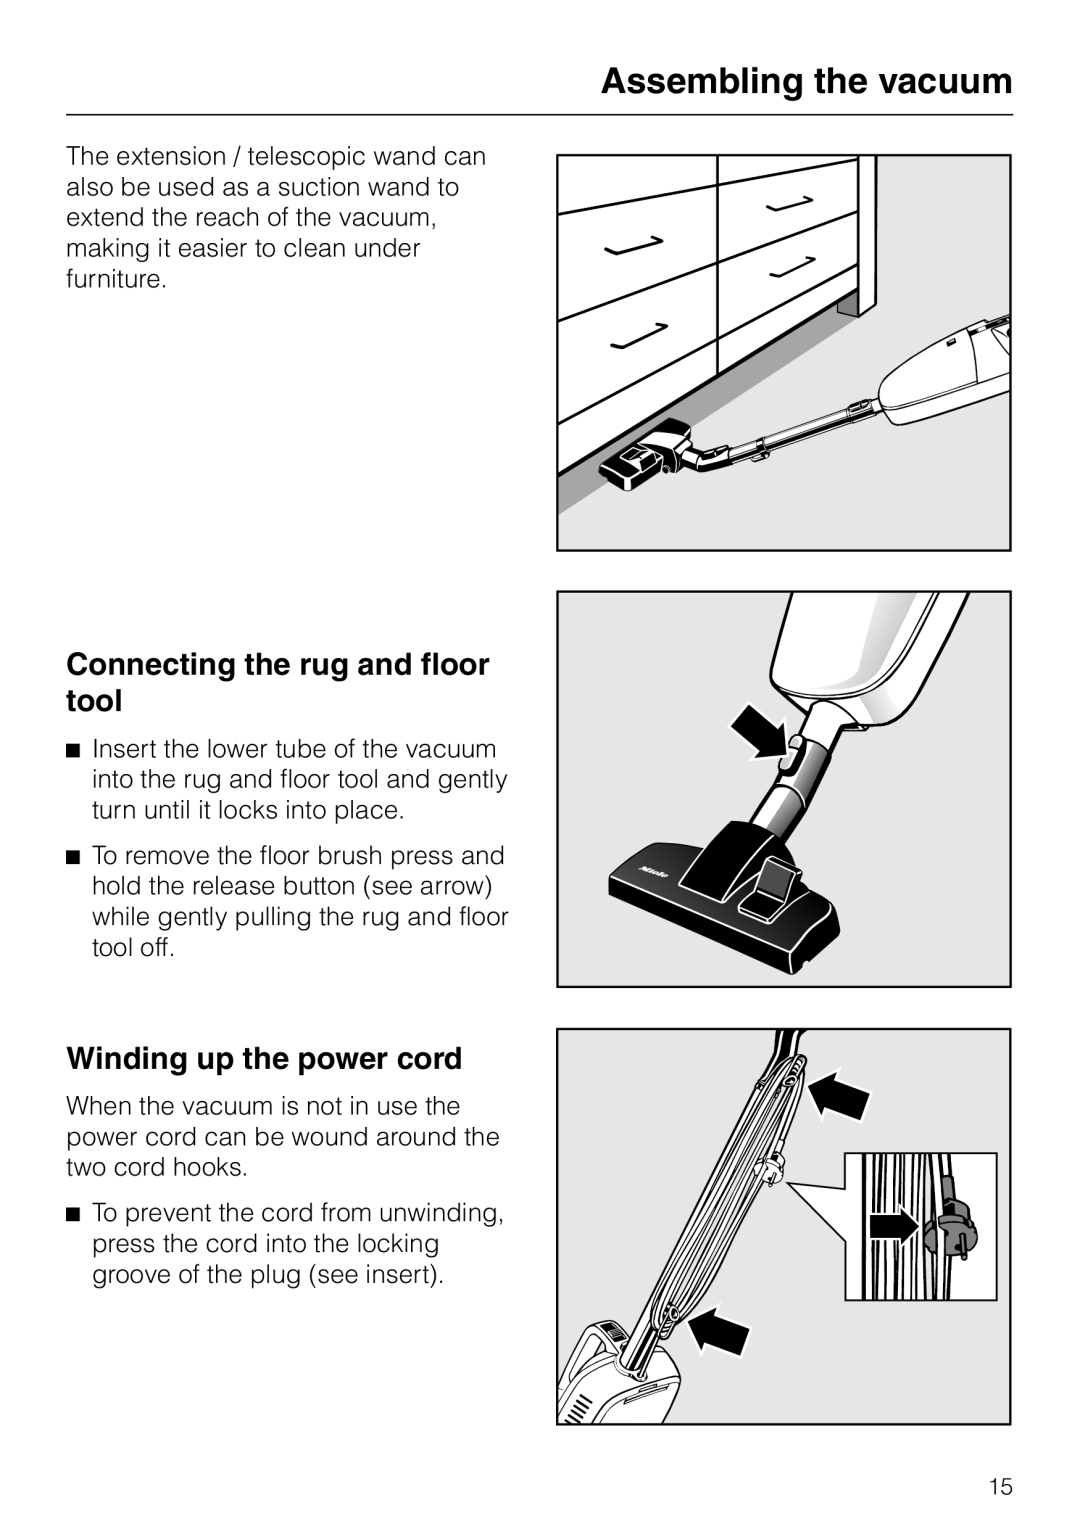 Miele S160, S140 manual Connecting the rug and floor tool, Winding up the power cord, Assembling the vacuum 